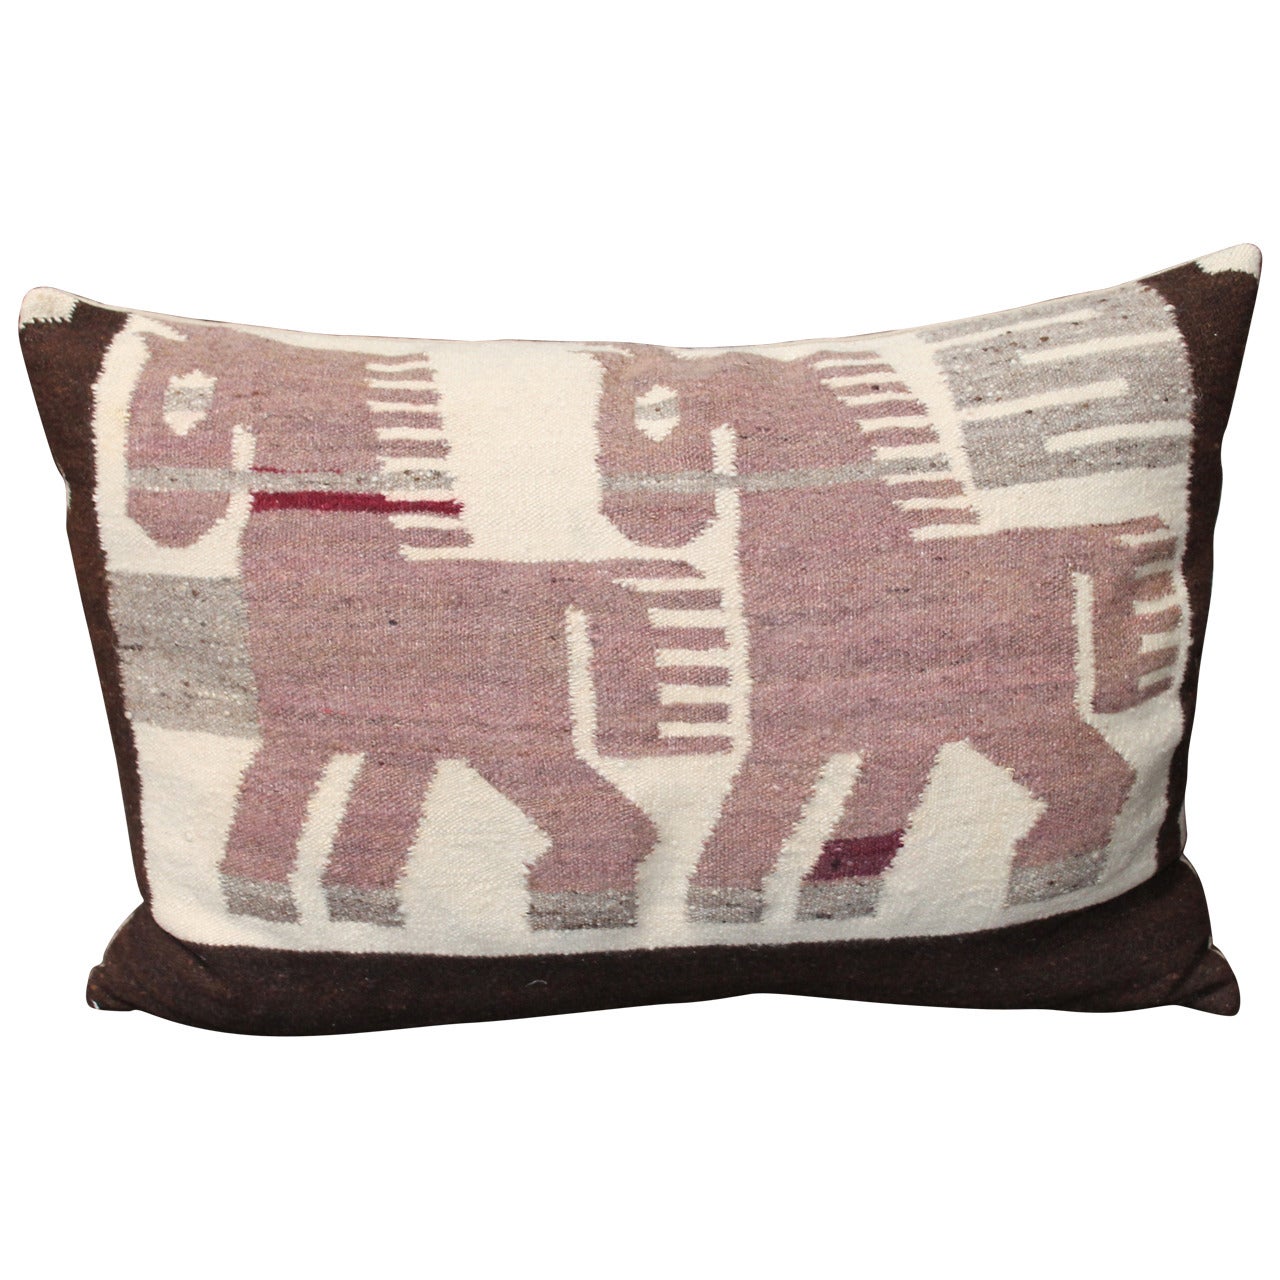 Pictorial Mexican Indian Bolster Pillow with Horses